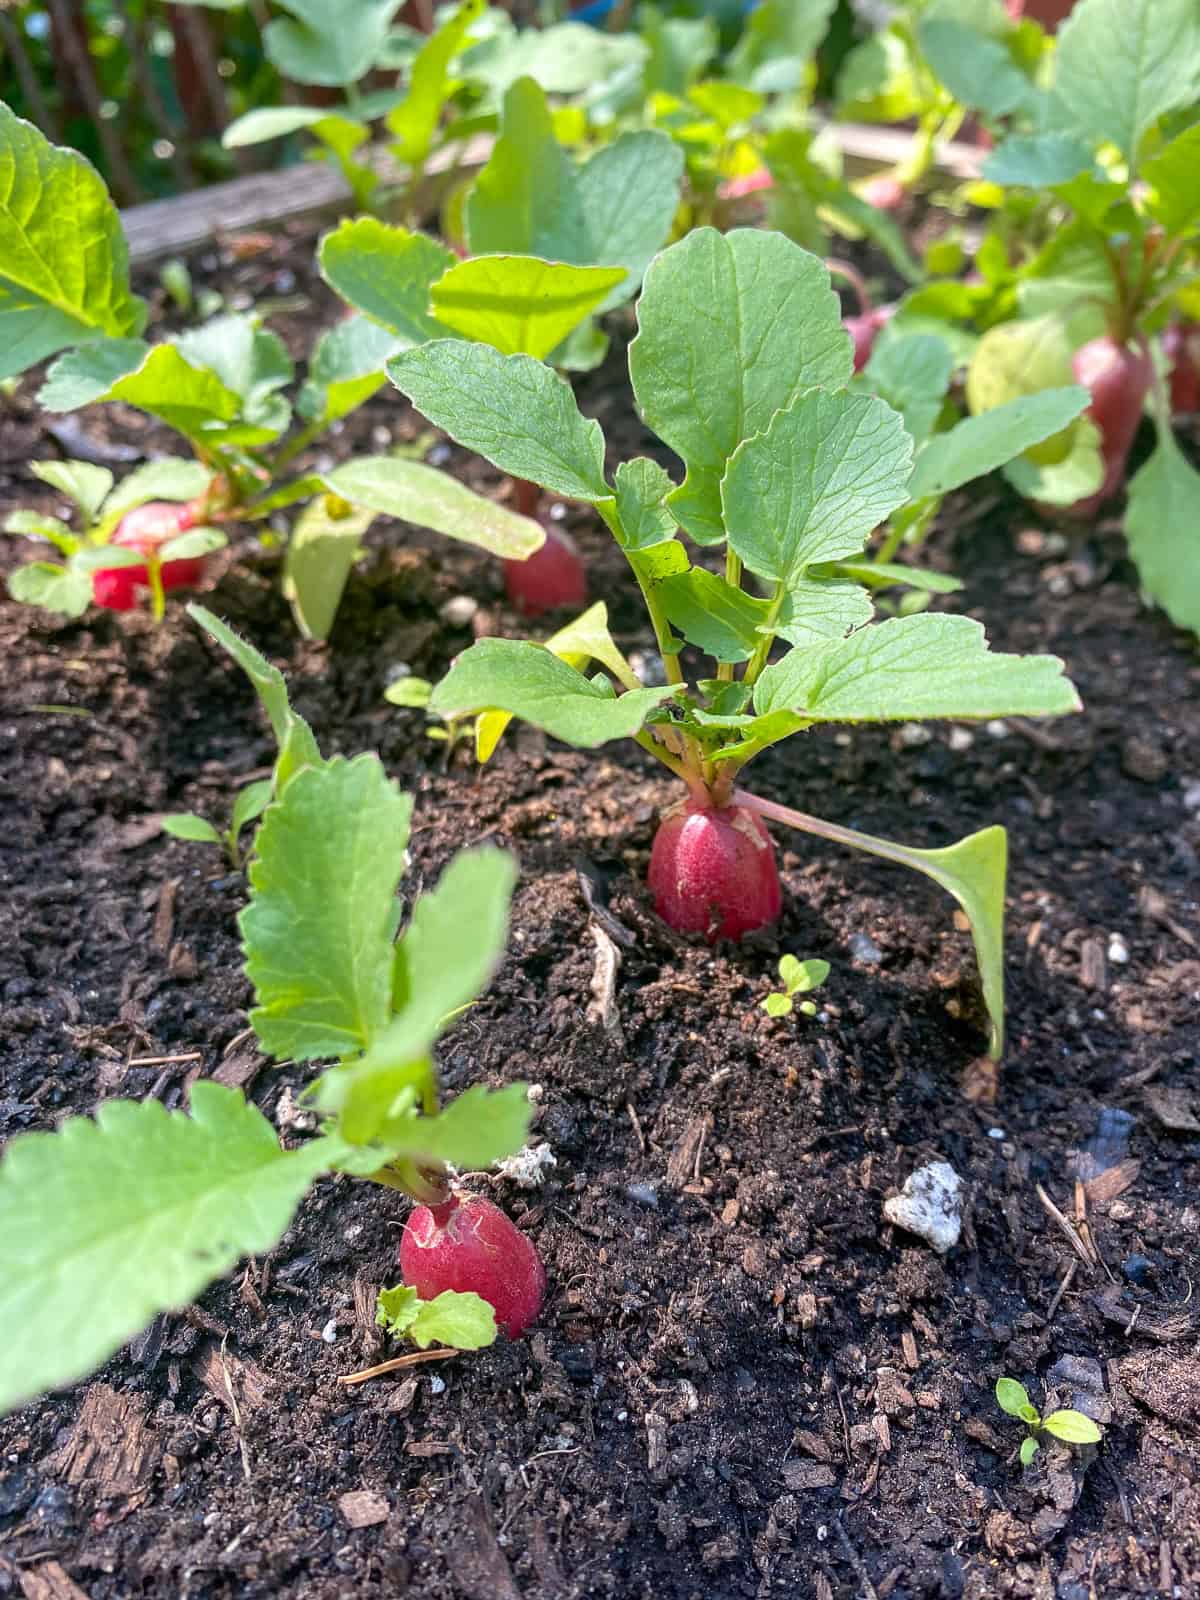 An image of french breakfast radishes growing in the soil in a raised bed.